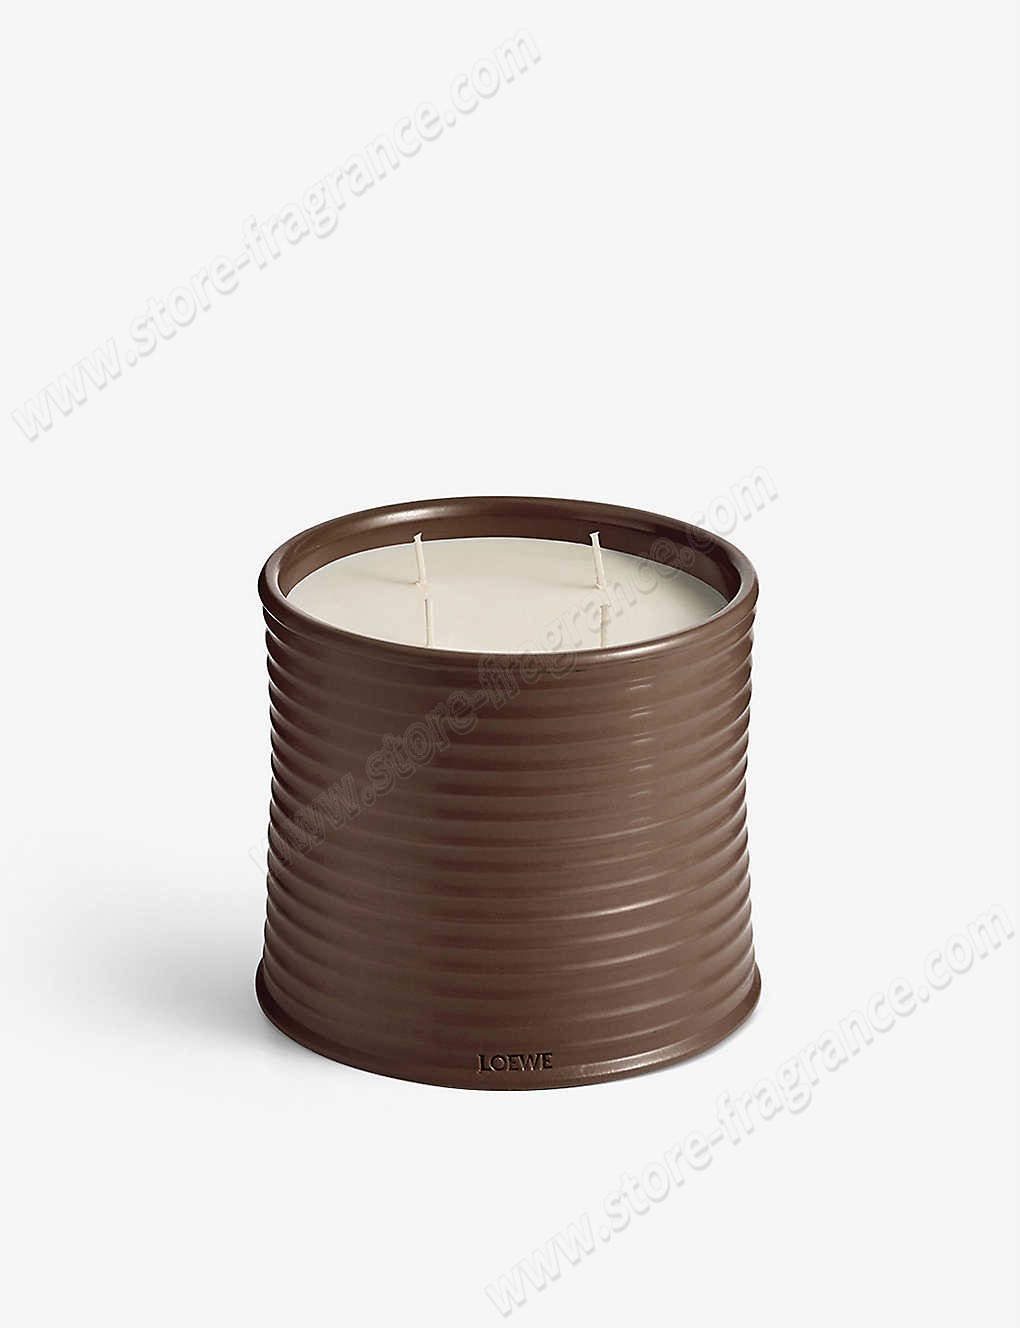 LOEWE/Coriander scented candle 2.12kg ✿ Discount Store - LOEWE/Coriander scented candle 2.12kg ✿ Discount Store